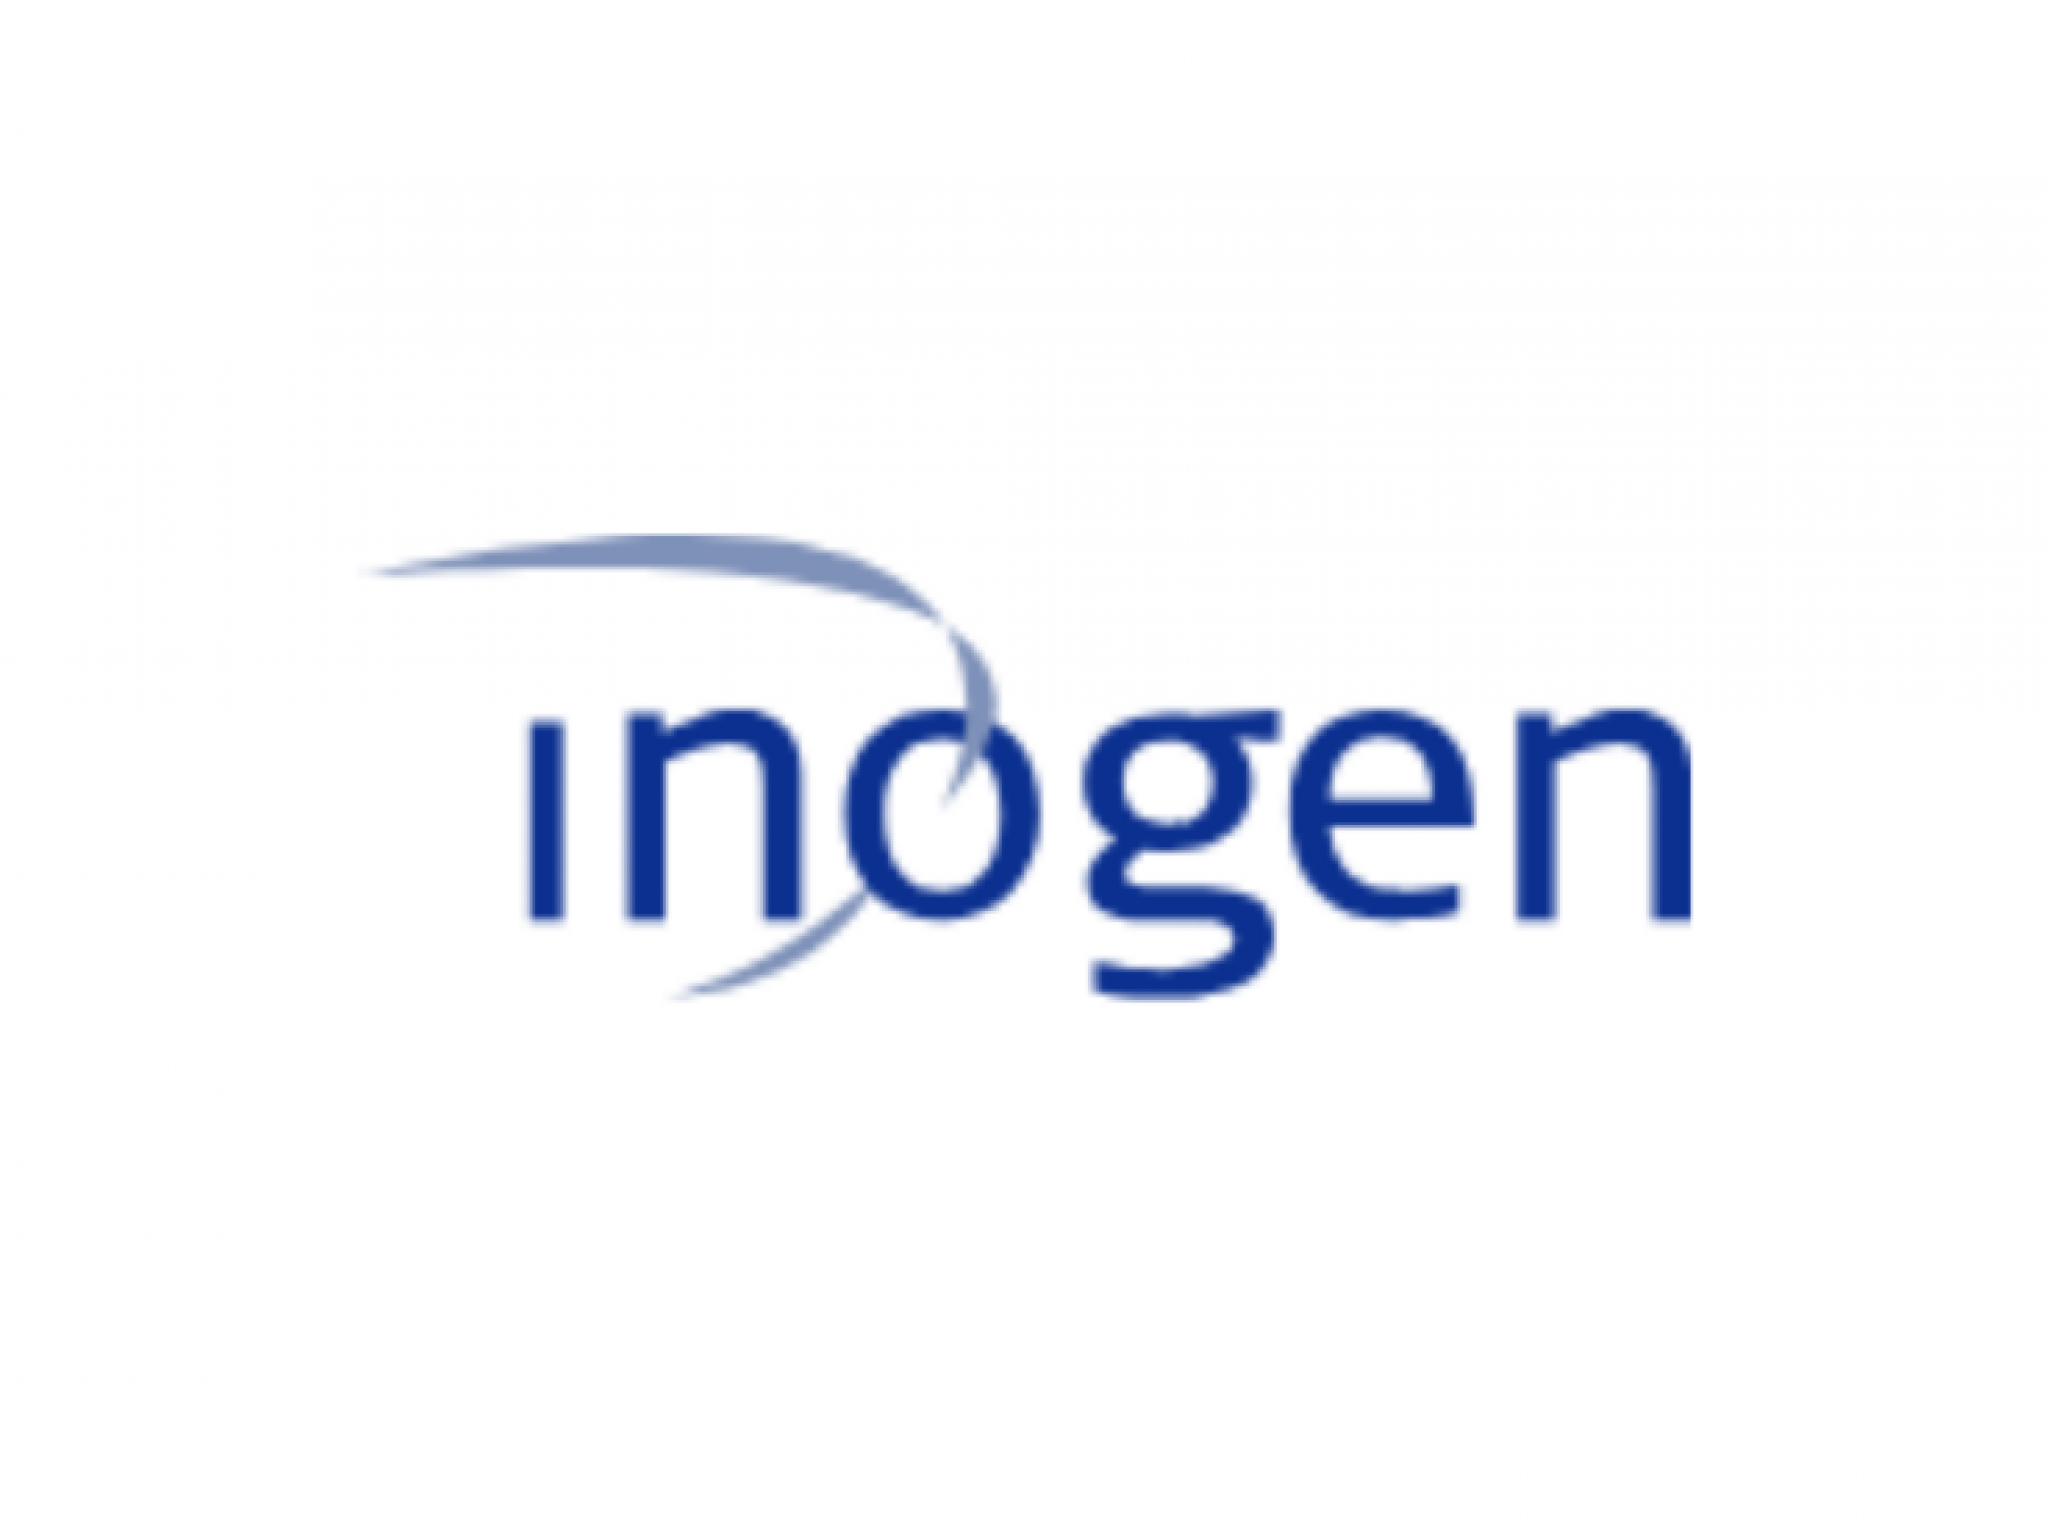  competitor-exit-a-boom-for-respiratory-device-focused-inogen-earns-analyst-upgrade 